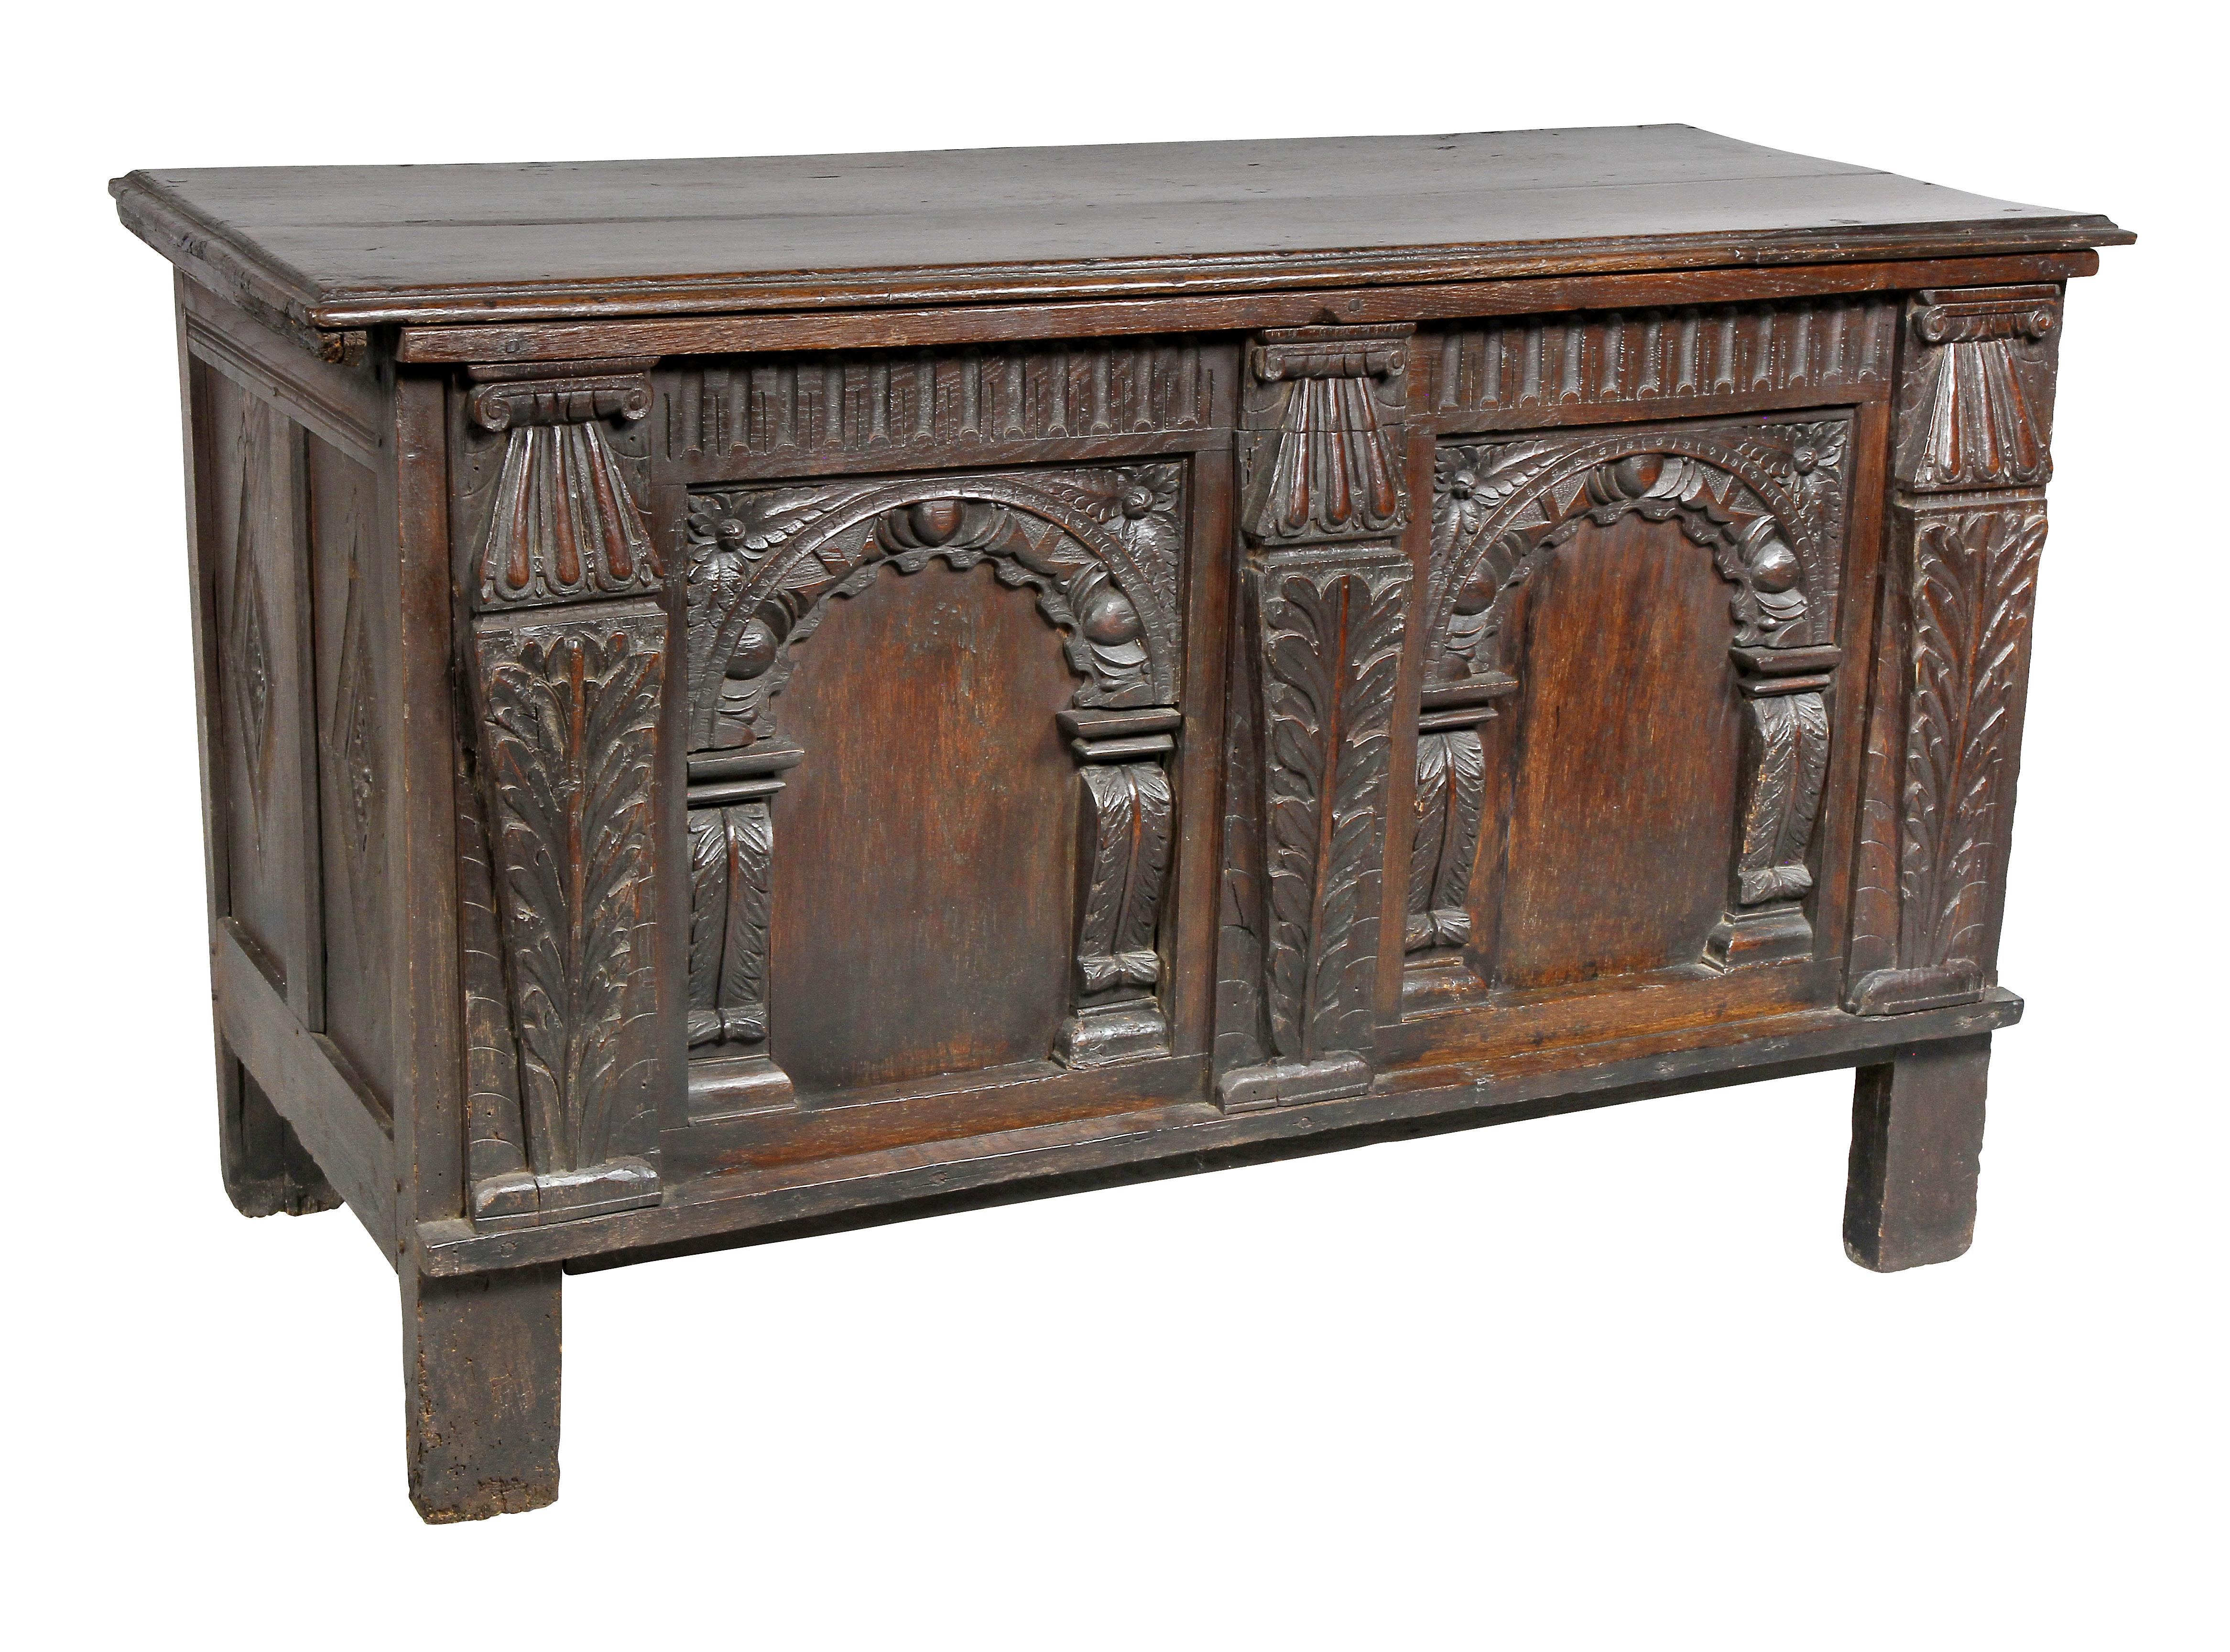 A good example with a hinged board top and case with fluting over two arcaded panels with carved columns in between, panelled sides, board feet. Provenance; Sears Estate.